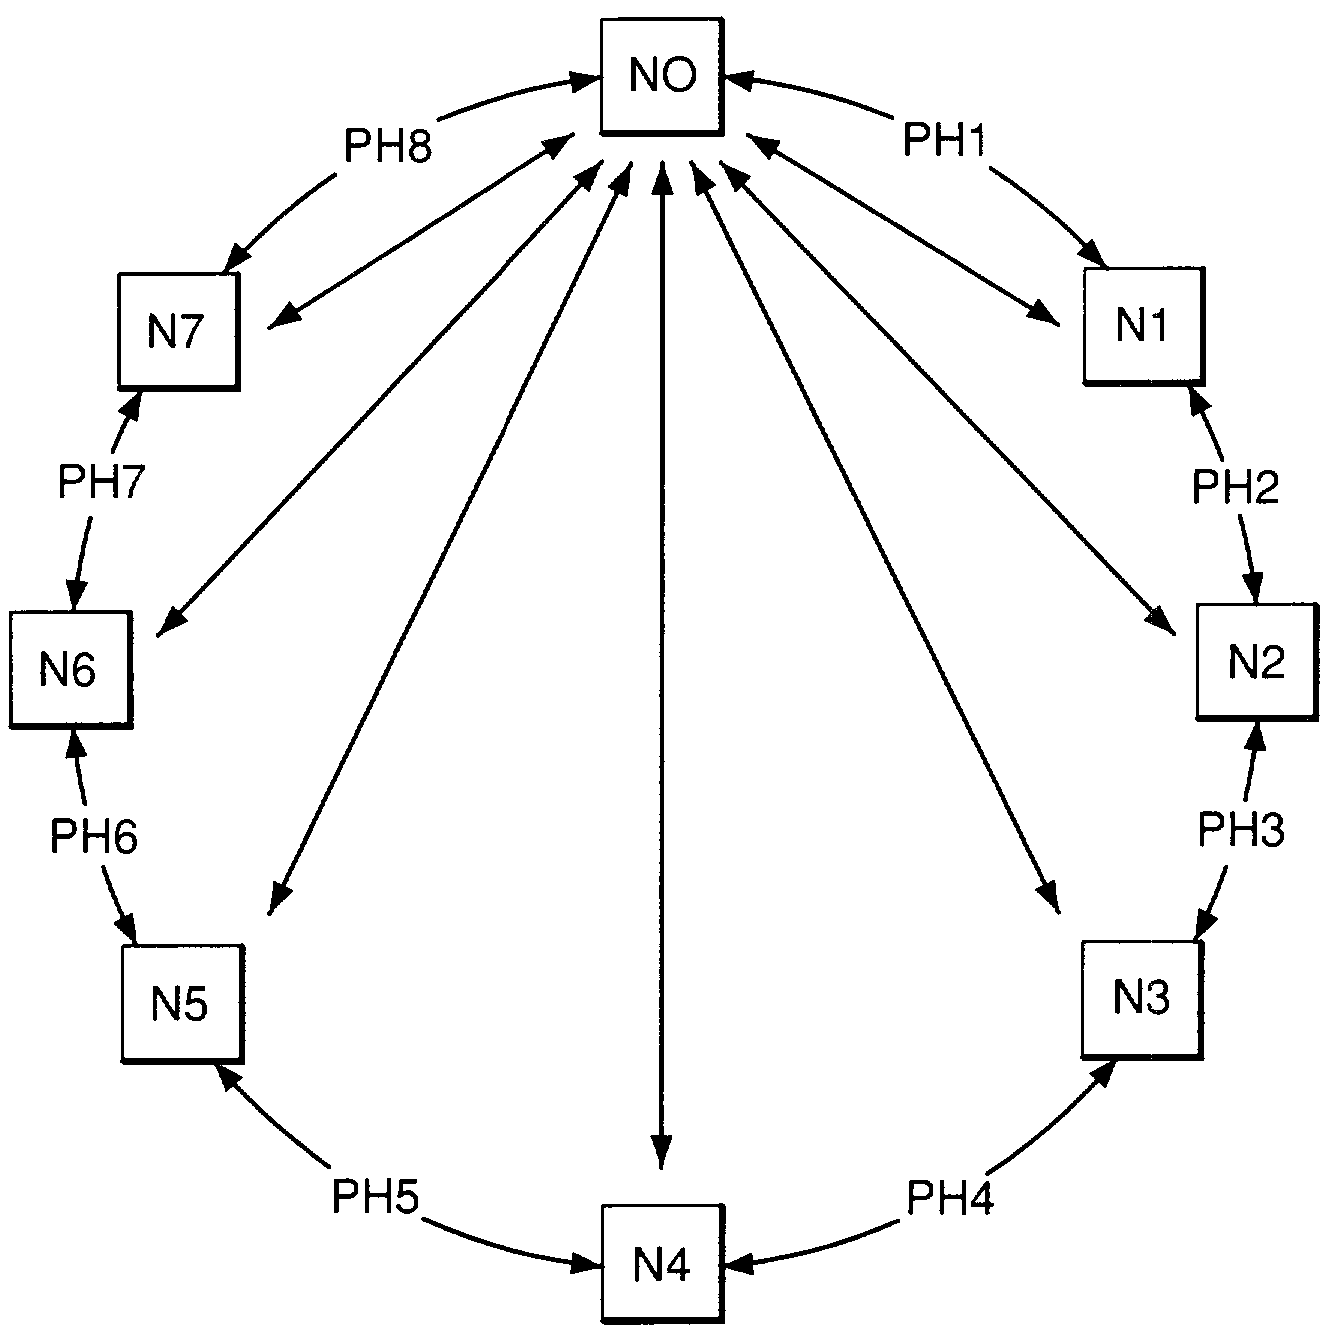 Logical star topologies for non-star networks